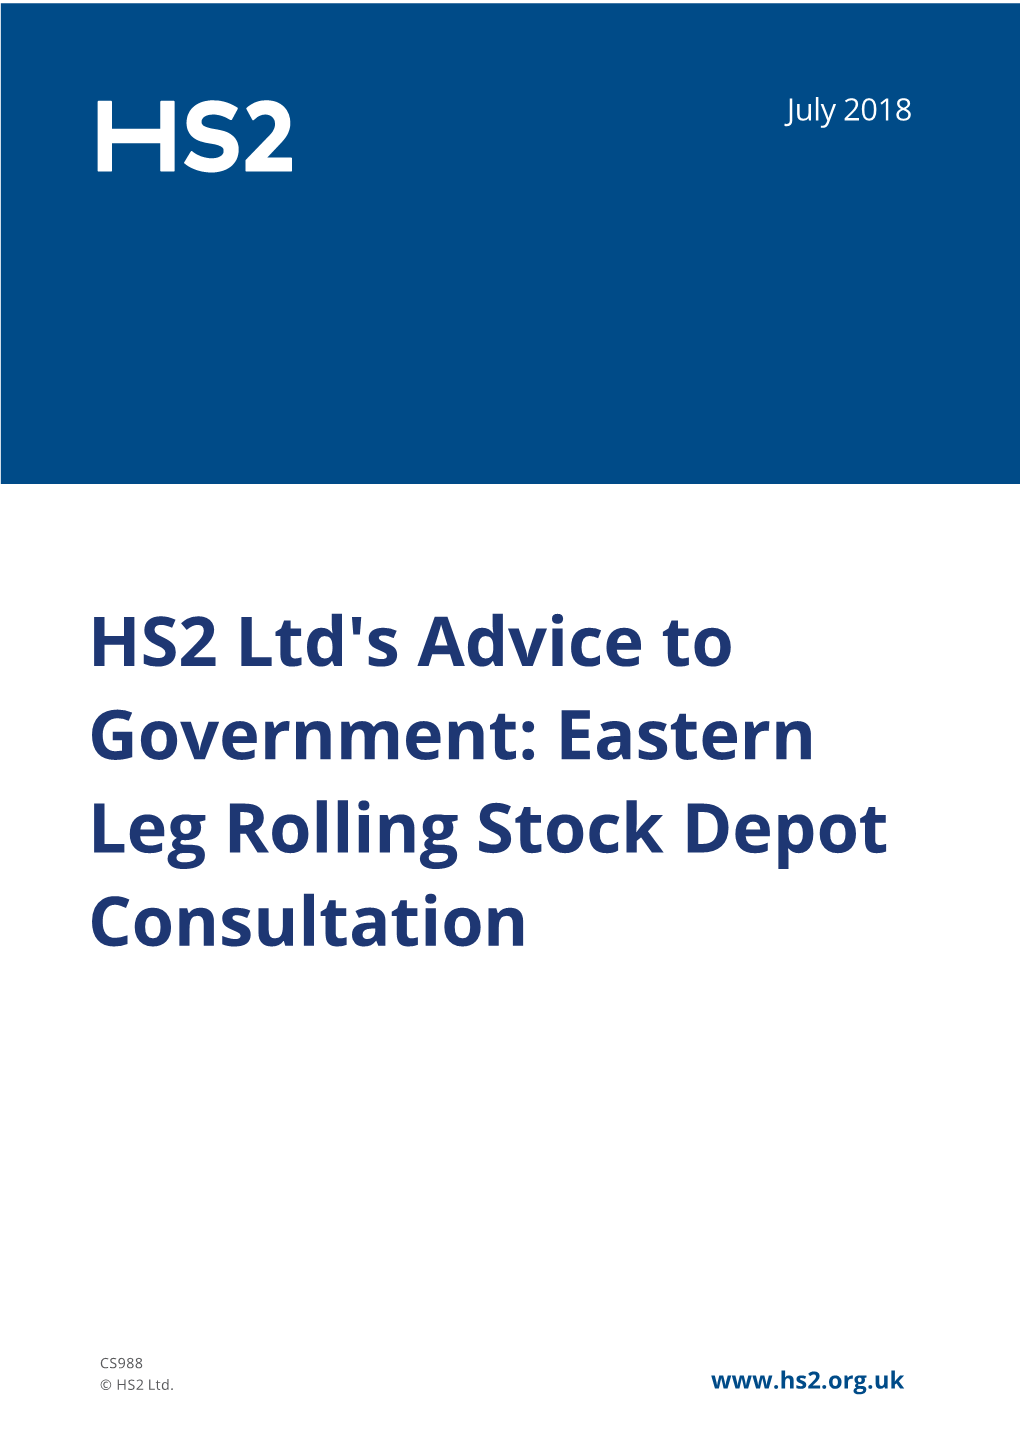 HS2 Ltd's Advice to Government: Eastern Leg Rolling Stock Depot Consultation